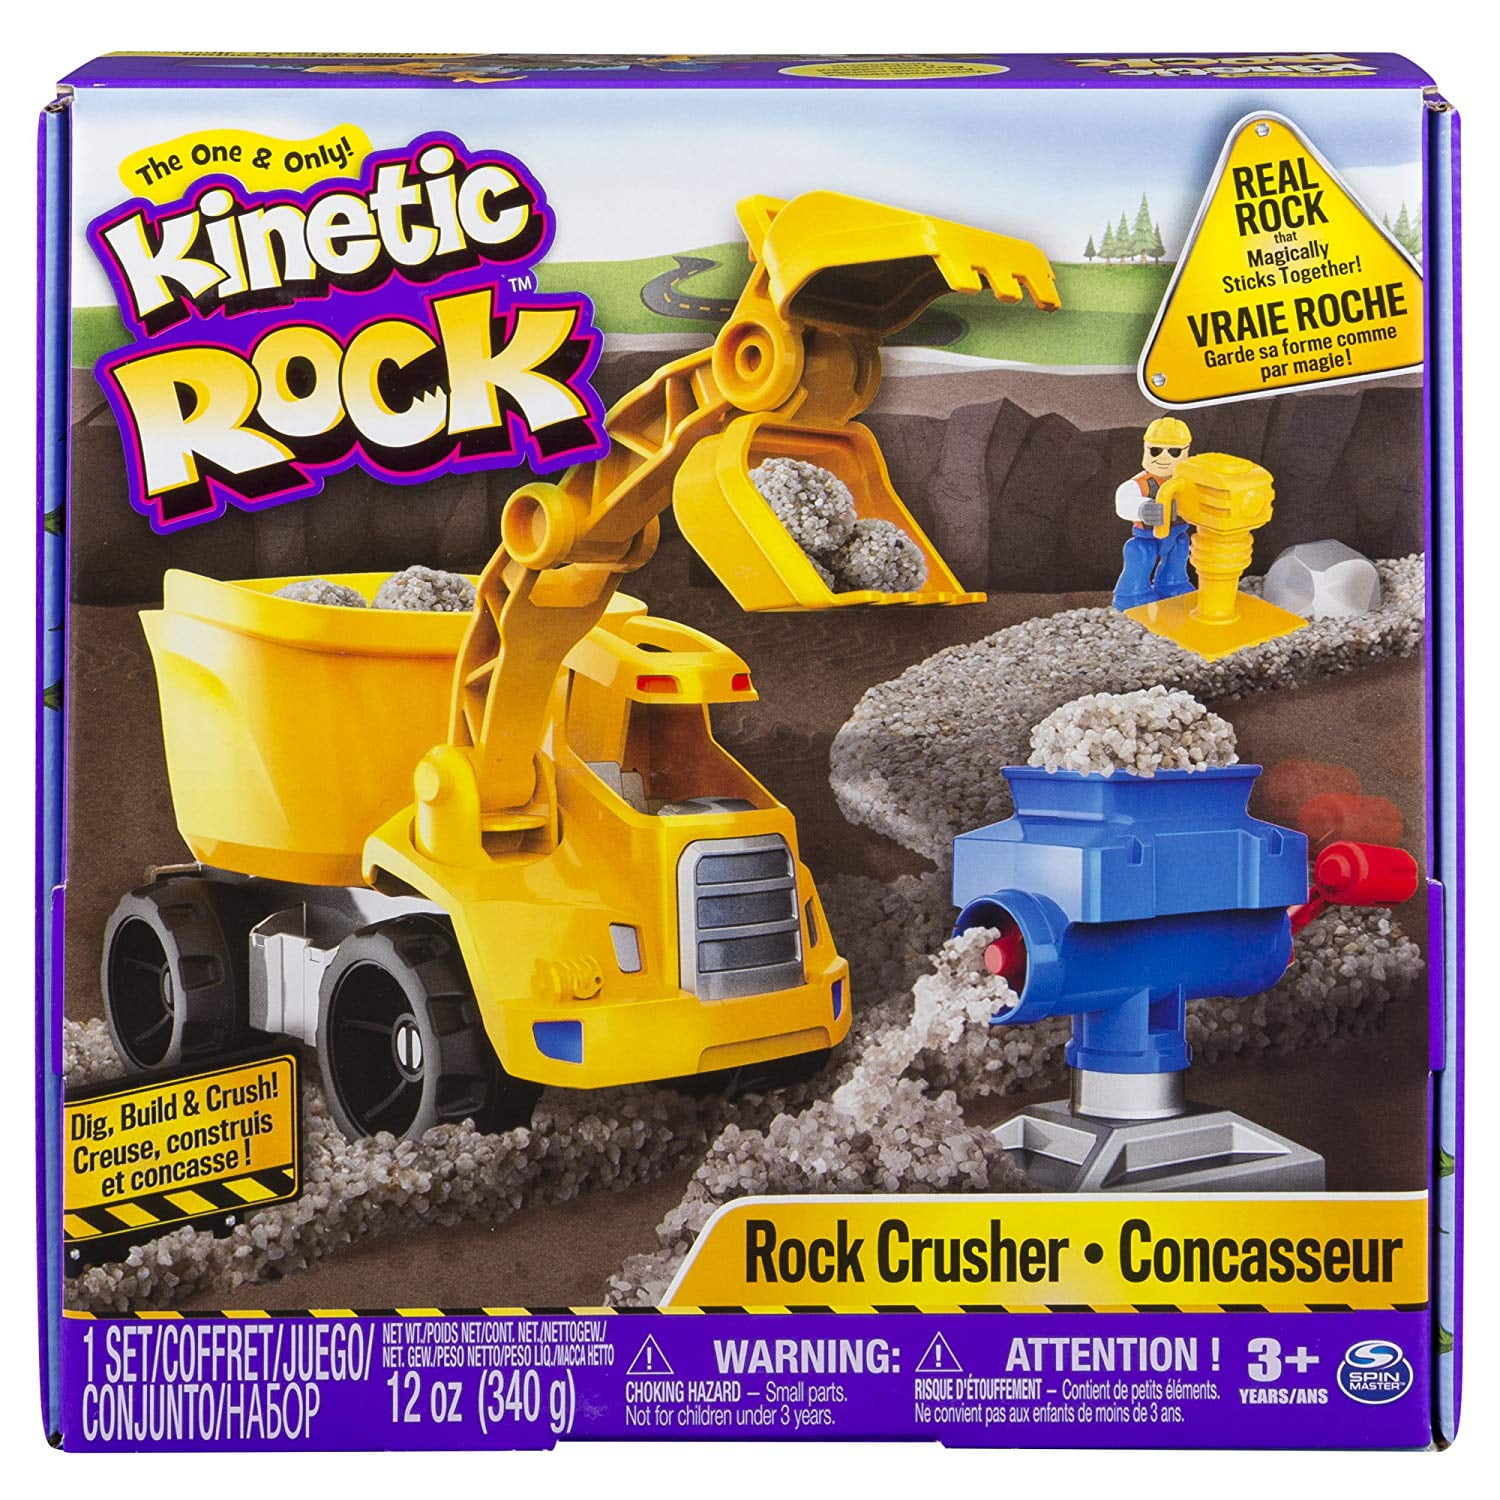 Kinetic Rock - Rock Crusher Toy Kit with Construction Tools, for Ages 3 and up